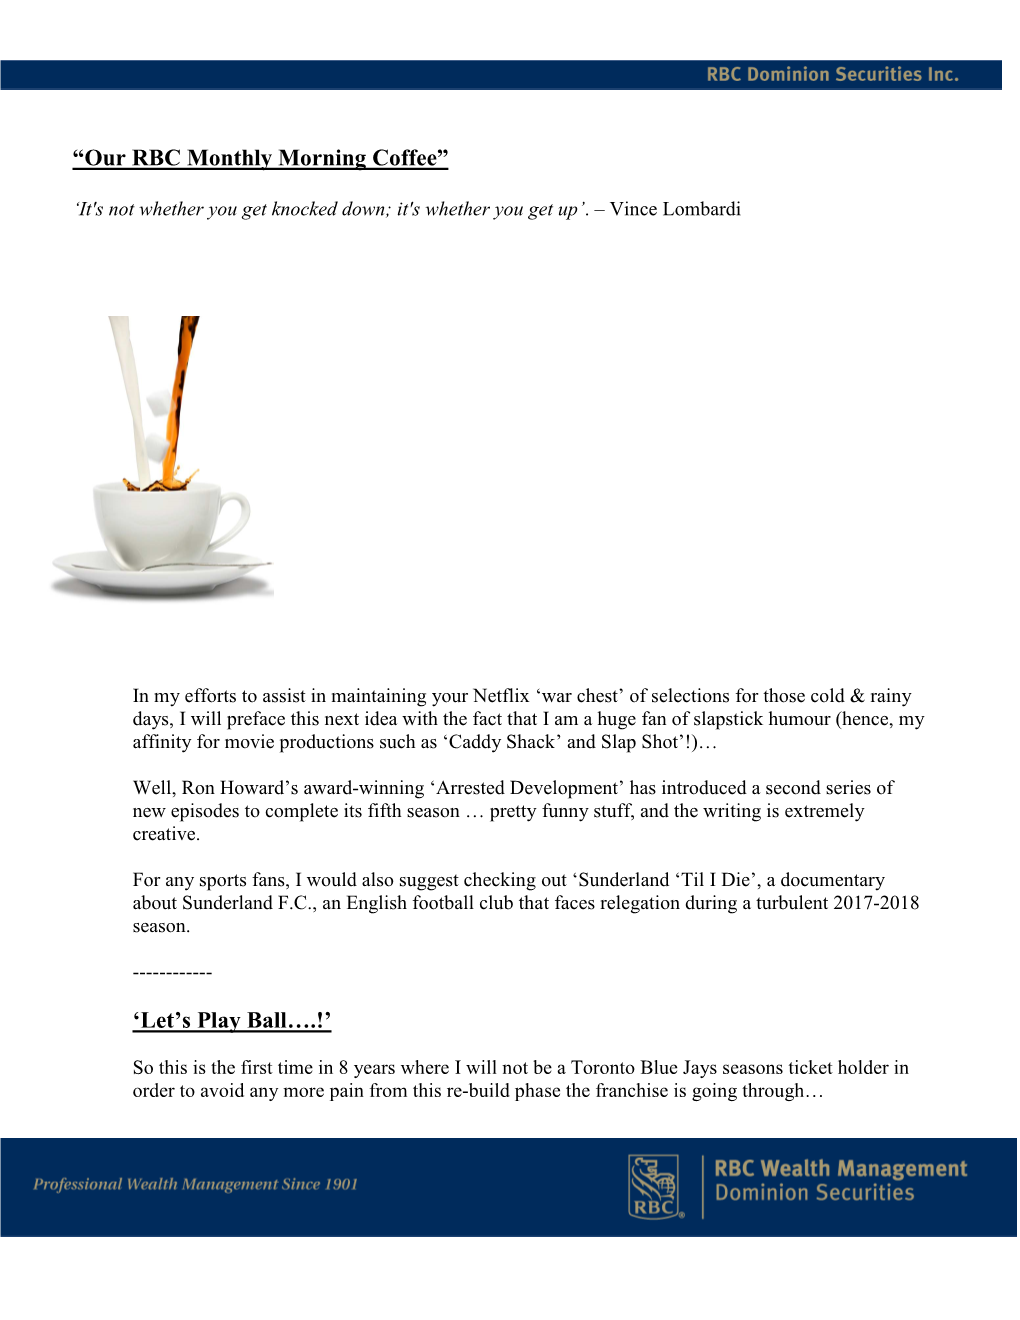 Our RBC Monthly Morning Coffee”